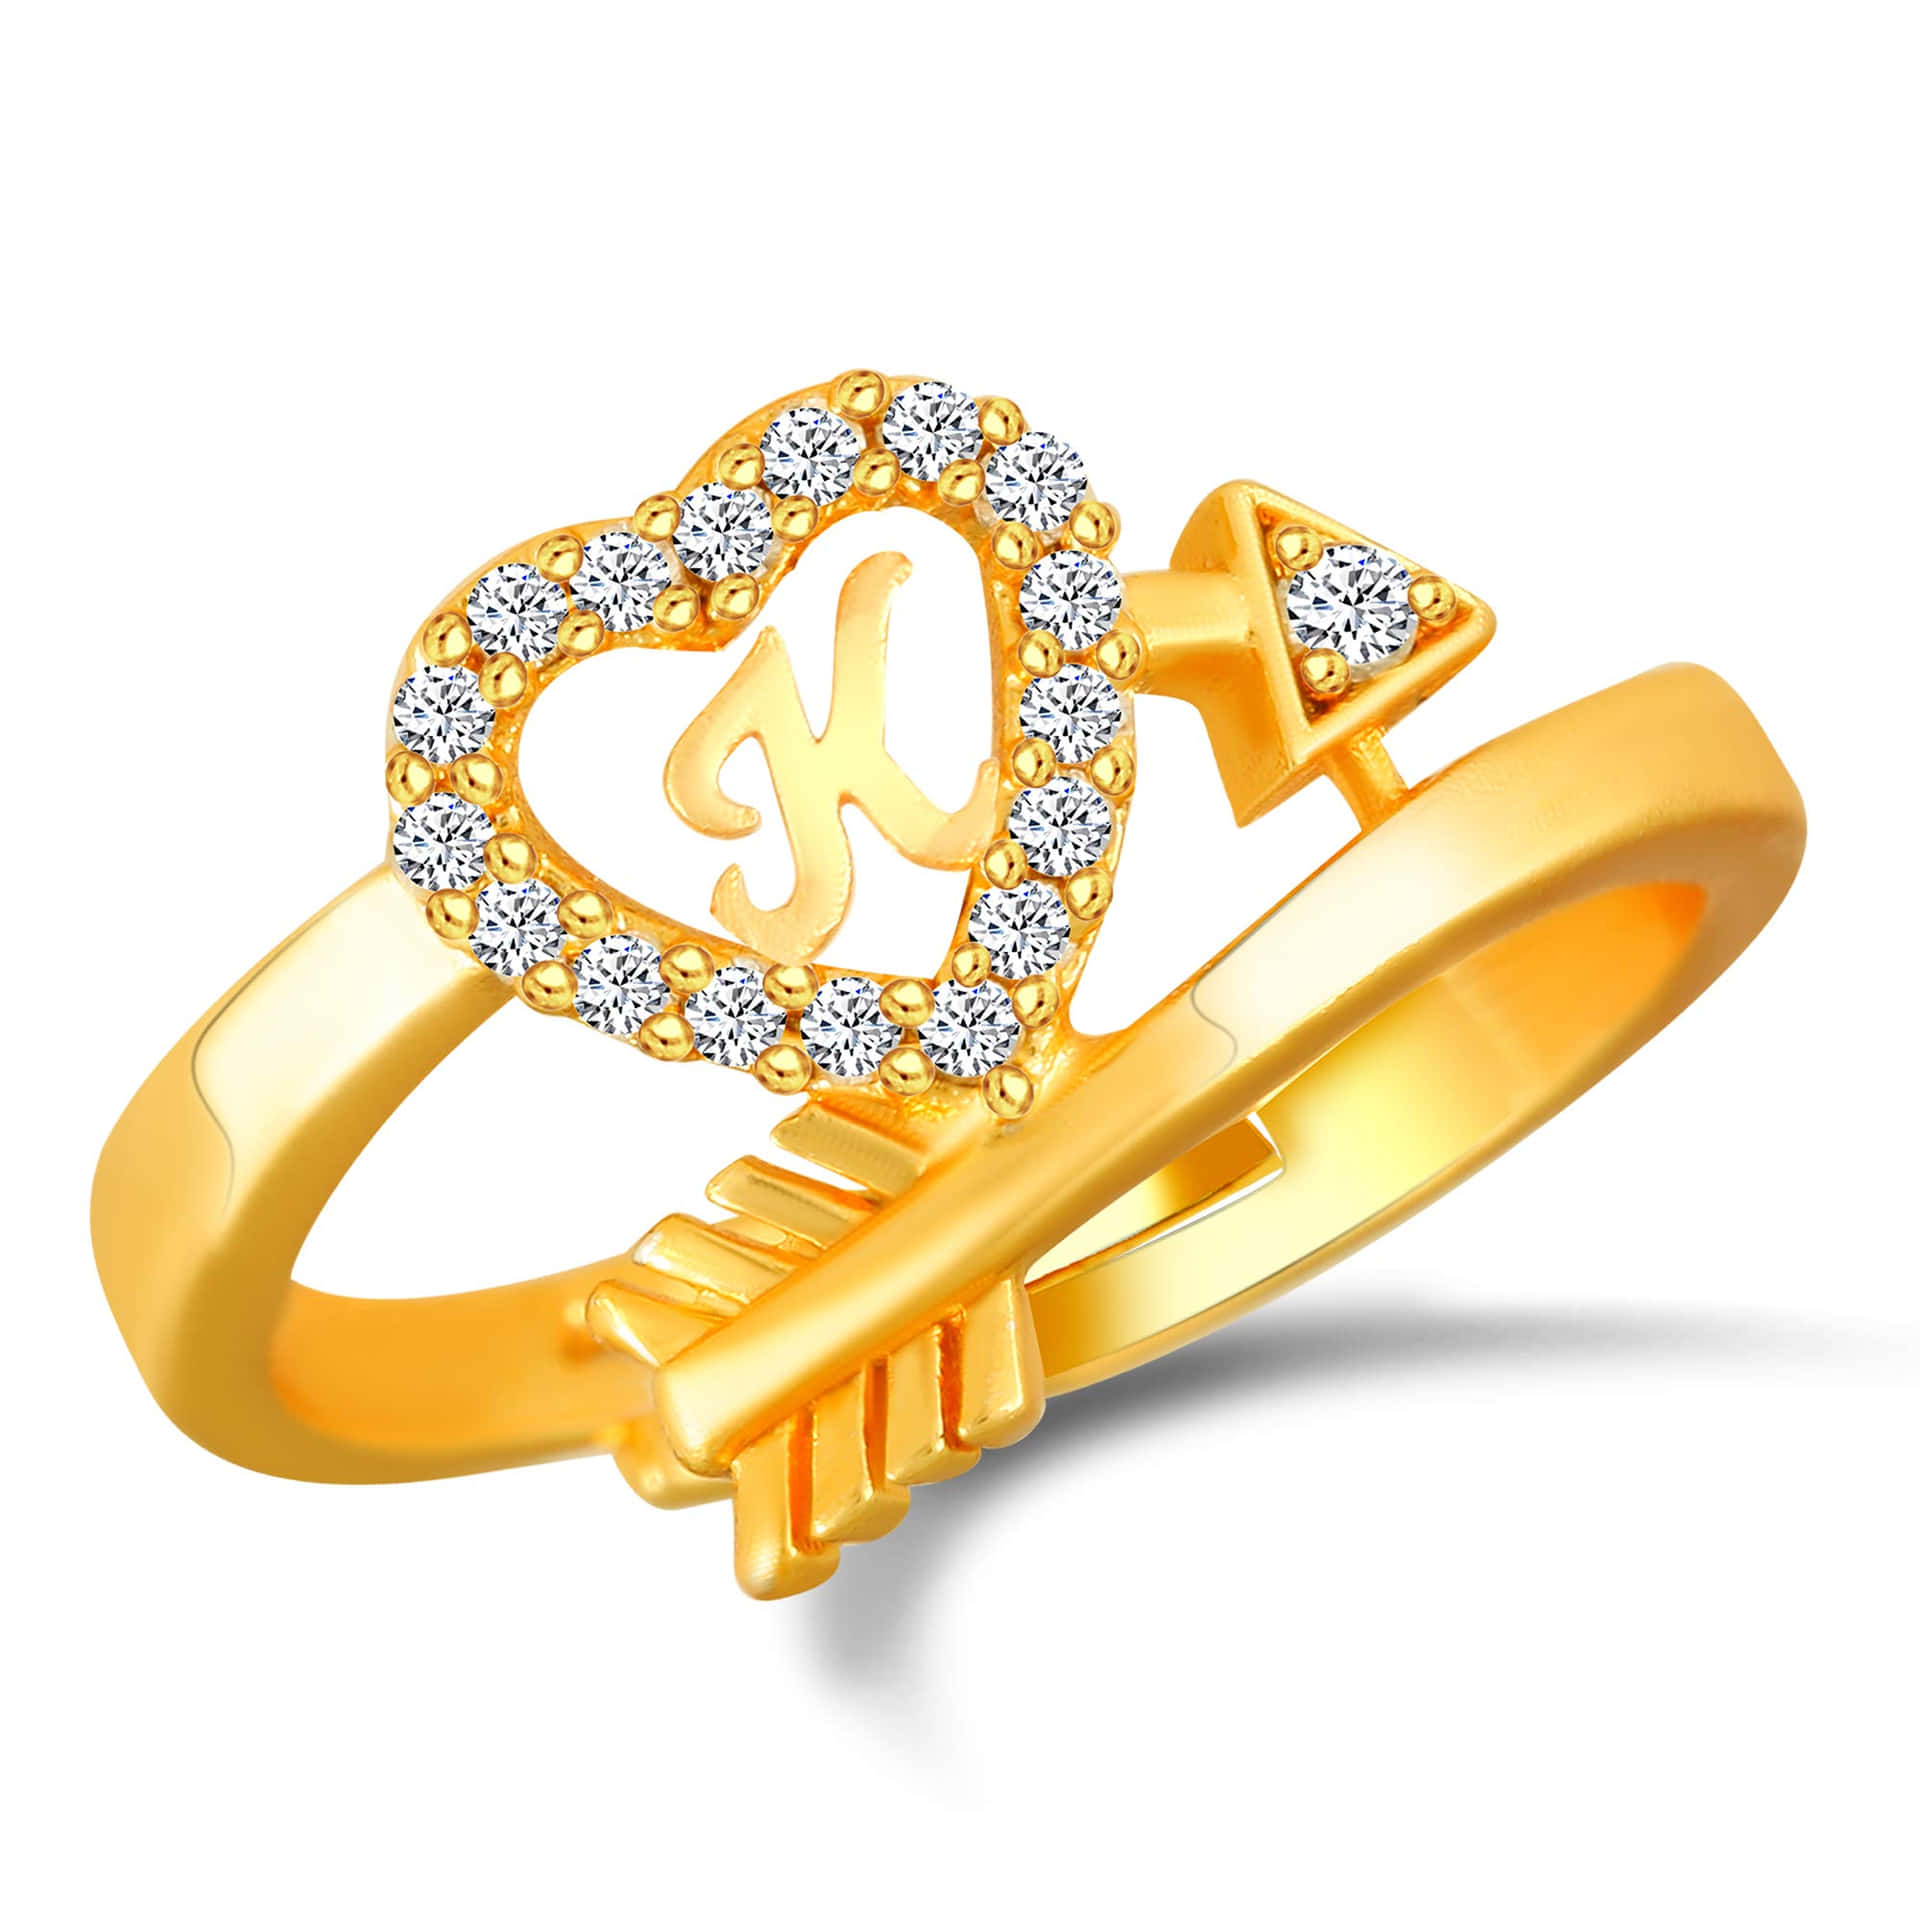 Download A Gold Ring With An Arrow And Heart | Wallpapers.com